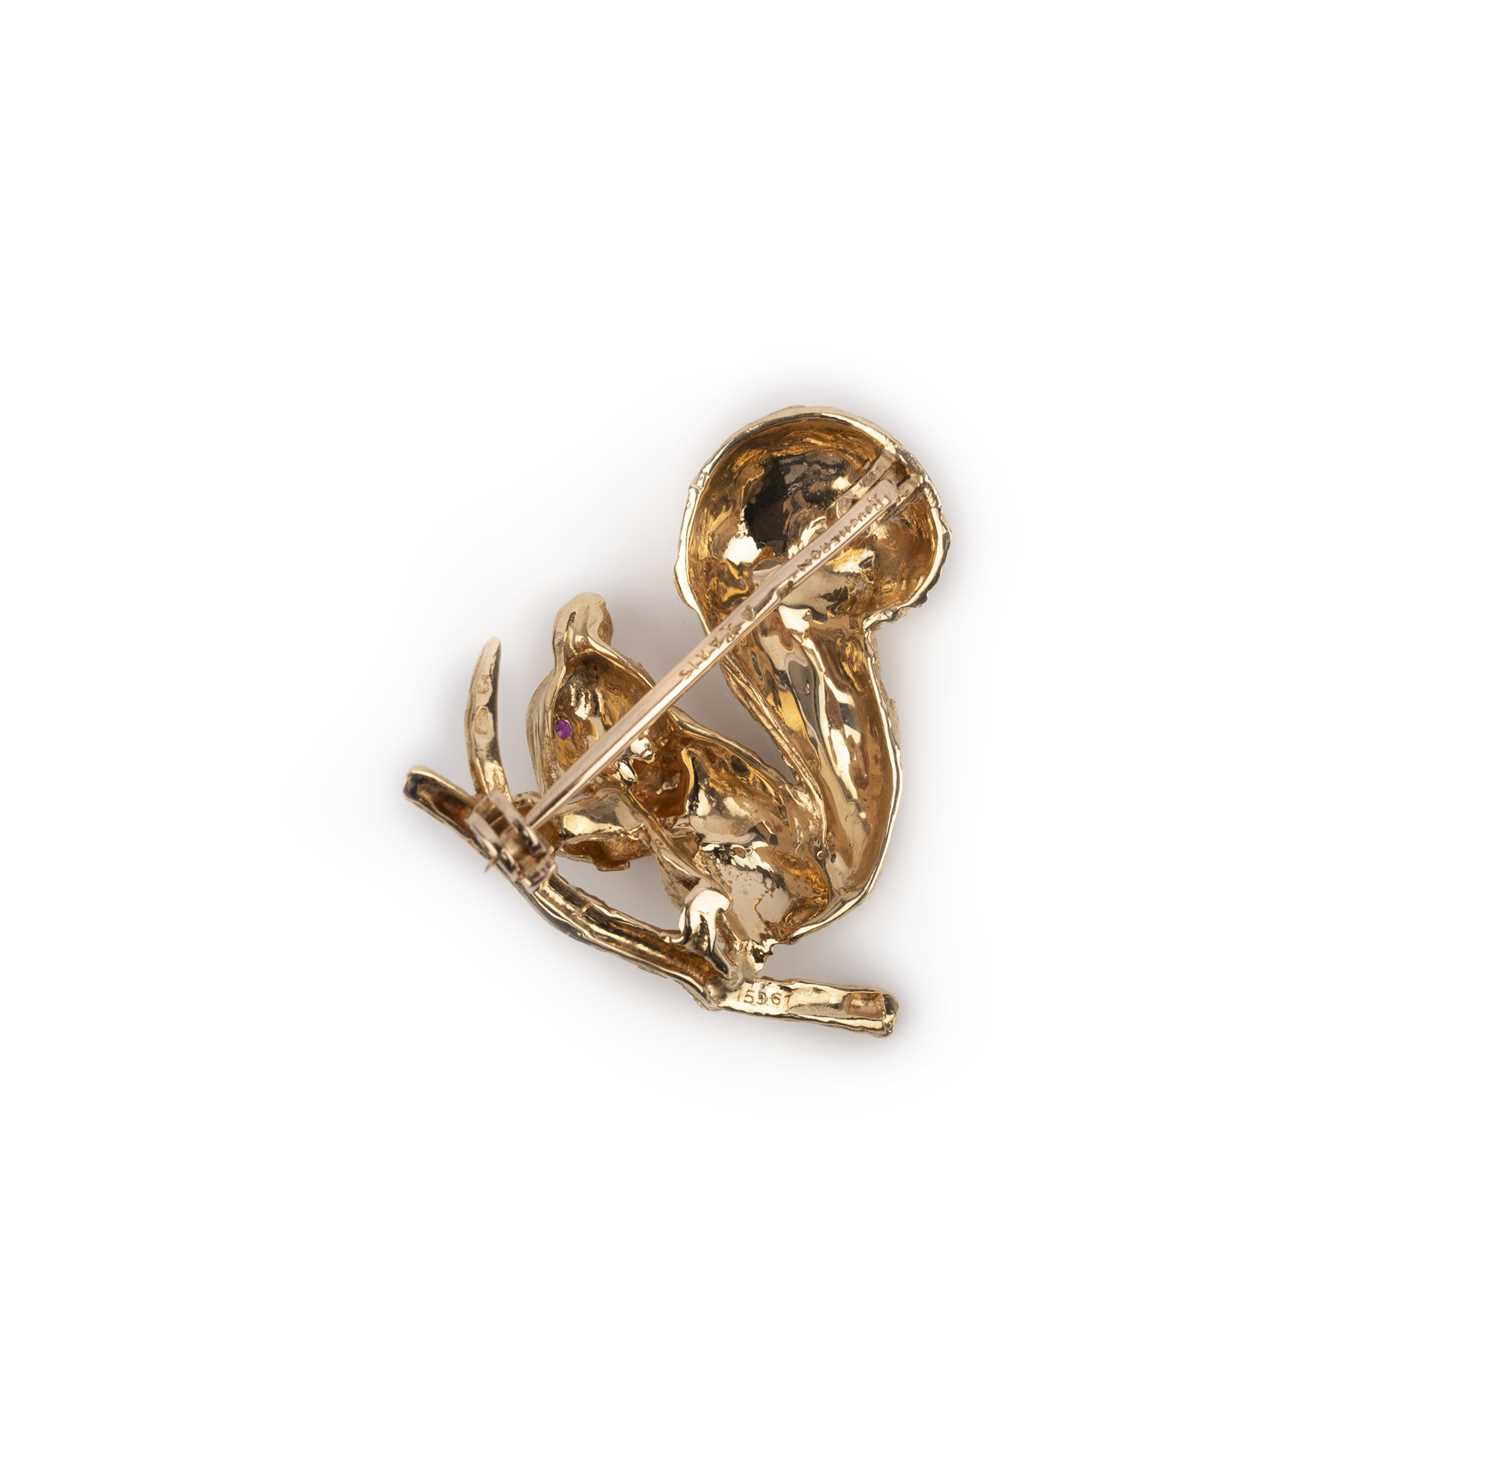 Boucheron, a gold and ruby brooch, mid 20th century, designed as a squirrel on a branch holding a - Image 2 of 2